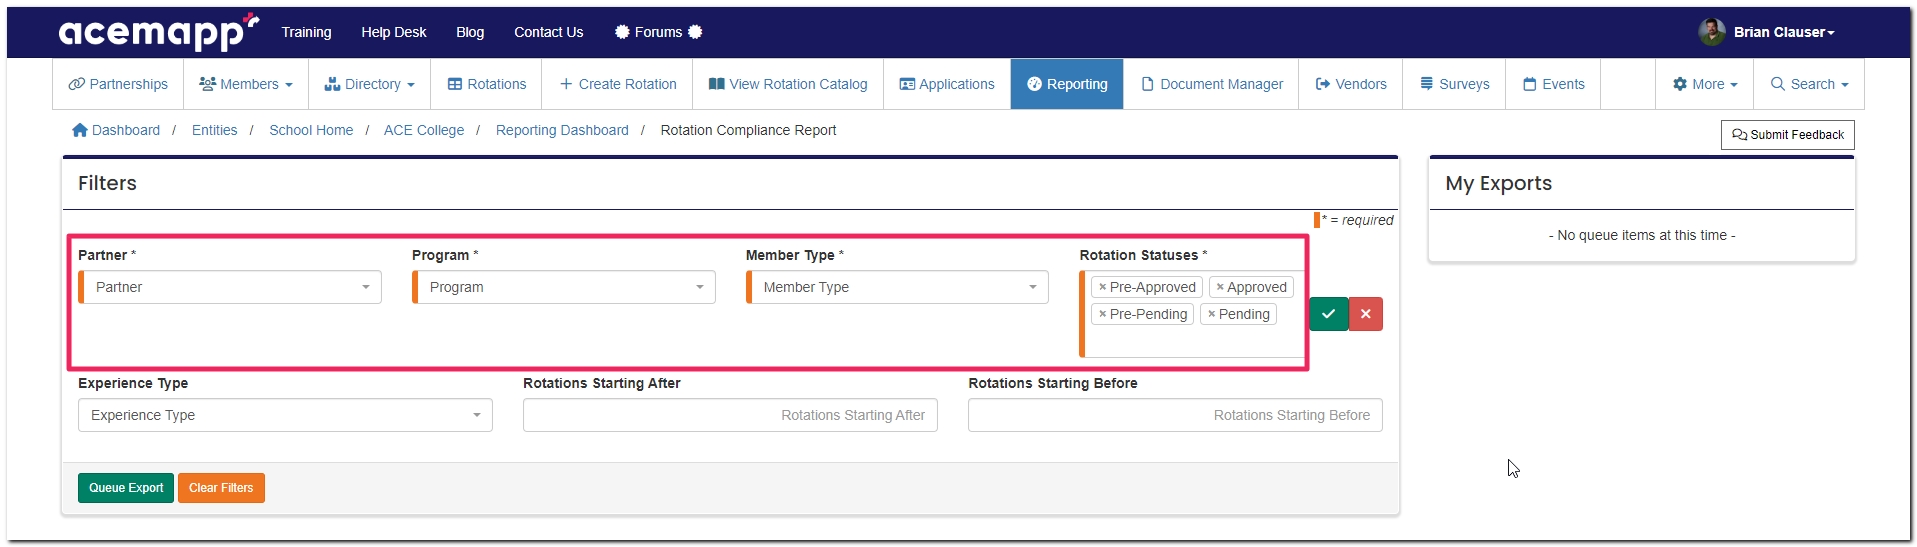 Rotation Compliance report filters panel highlighting required filters